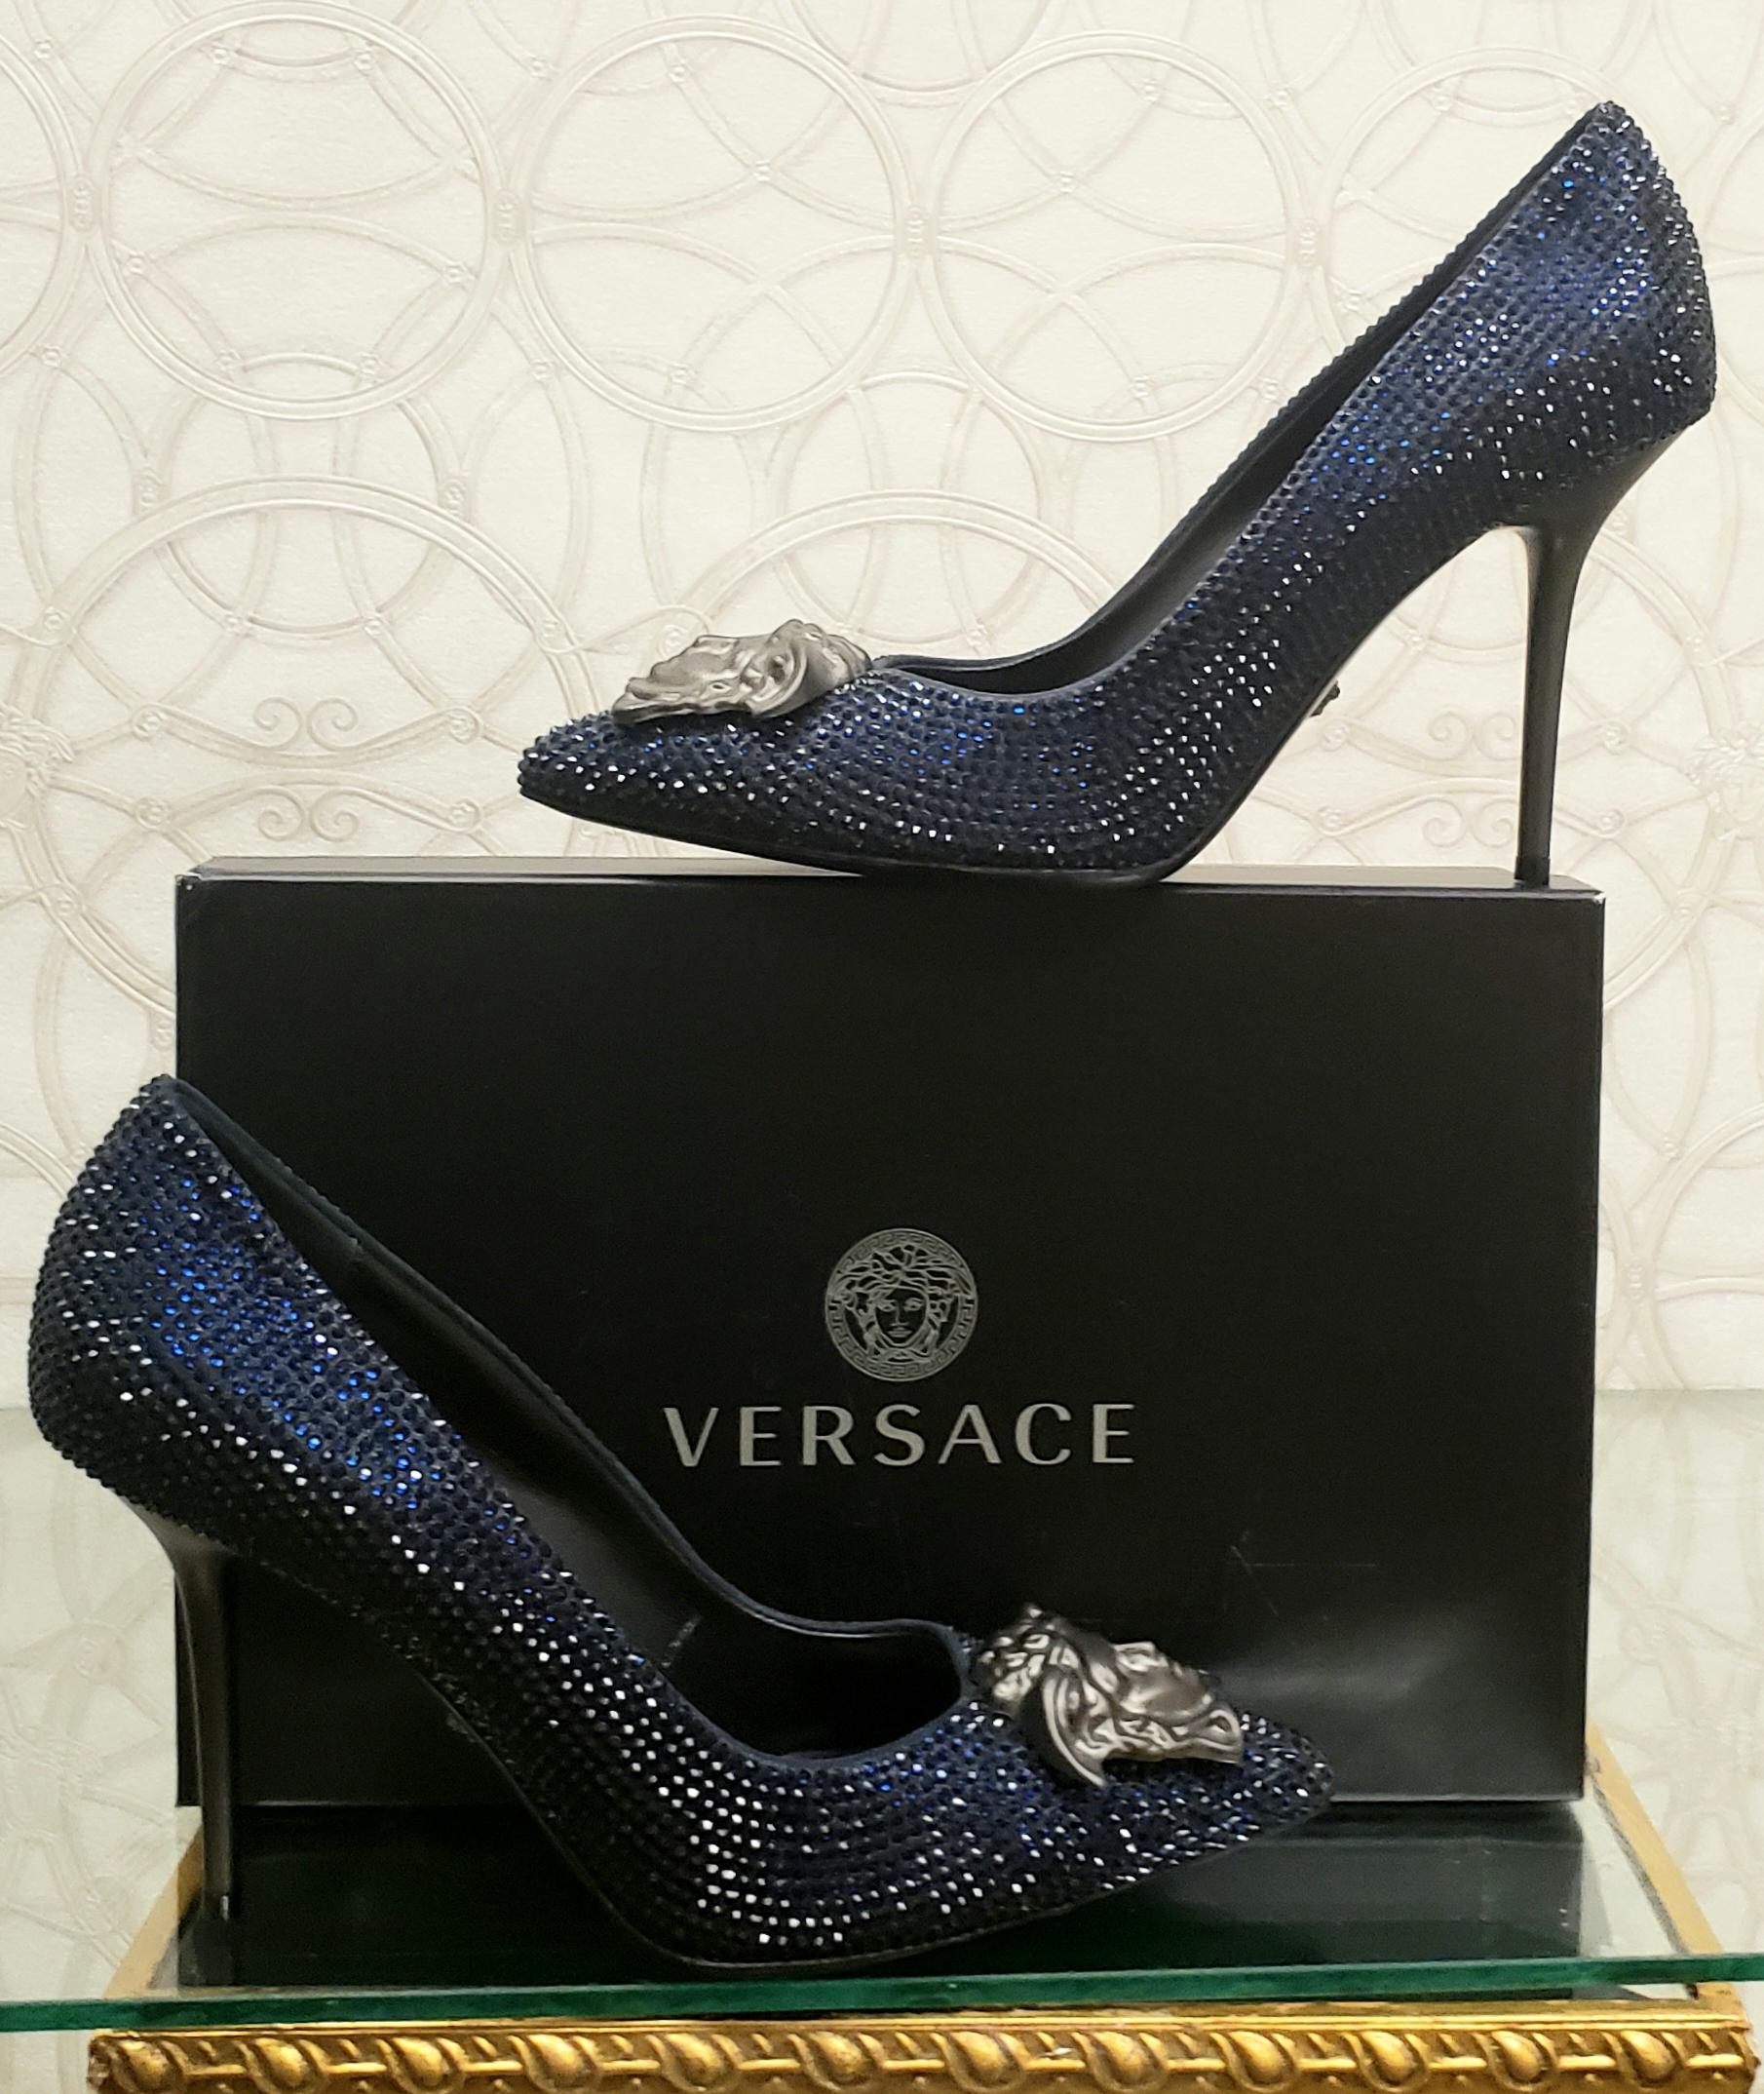 VERSACE PALAZZO PUMPS

Blue Sapphire crystal shoes from the Palazzo line, with stiletto heel.

DETAILS:

Closed toe
Medusa plaque

Content: 100% Leather (Lining and Sole) 

Color: Blue Sapphire

Heel: 4 inches

Size 39 - US 9
insole: 10 1/4